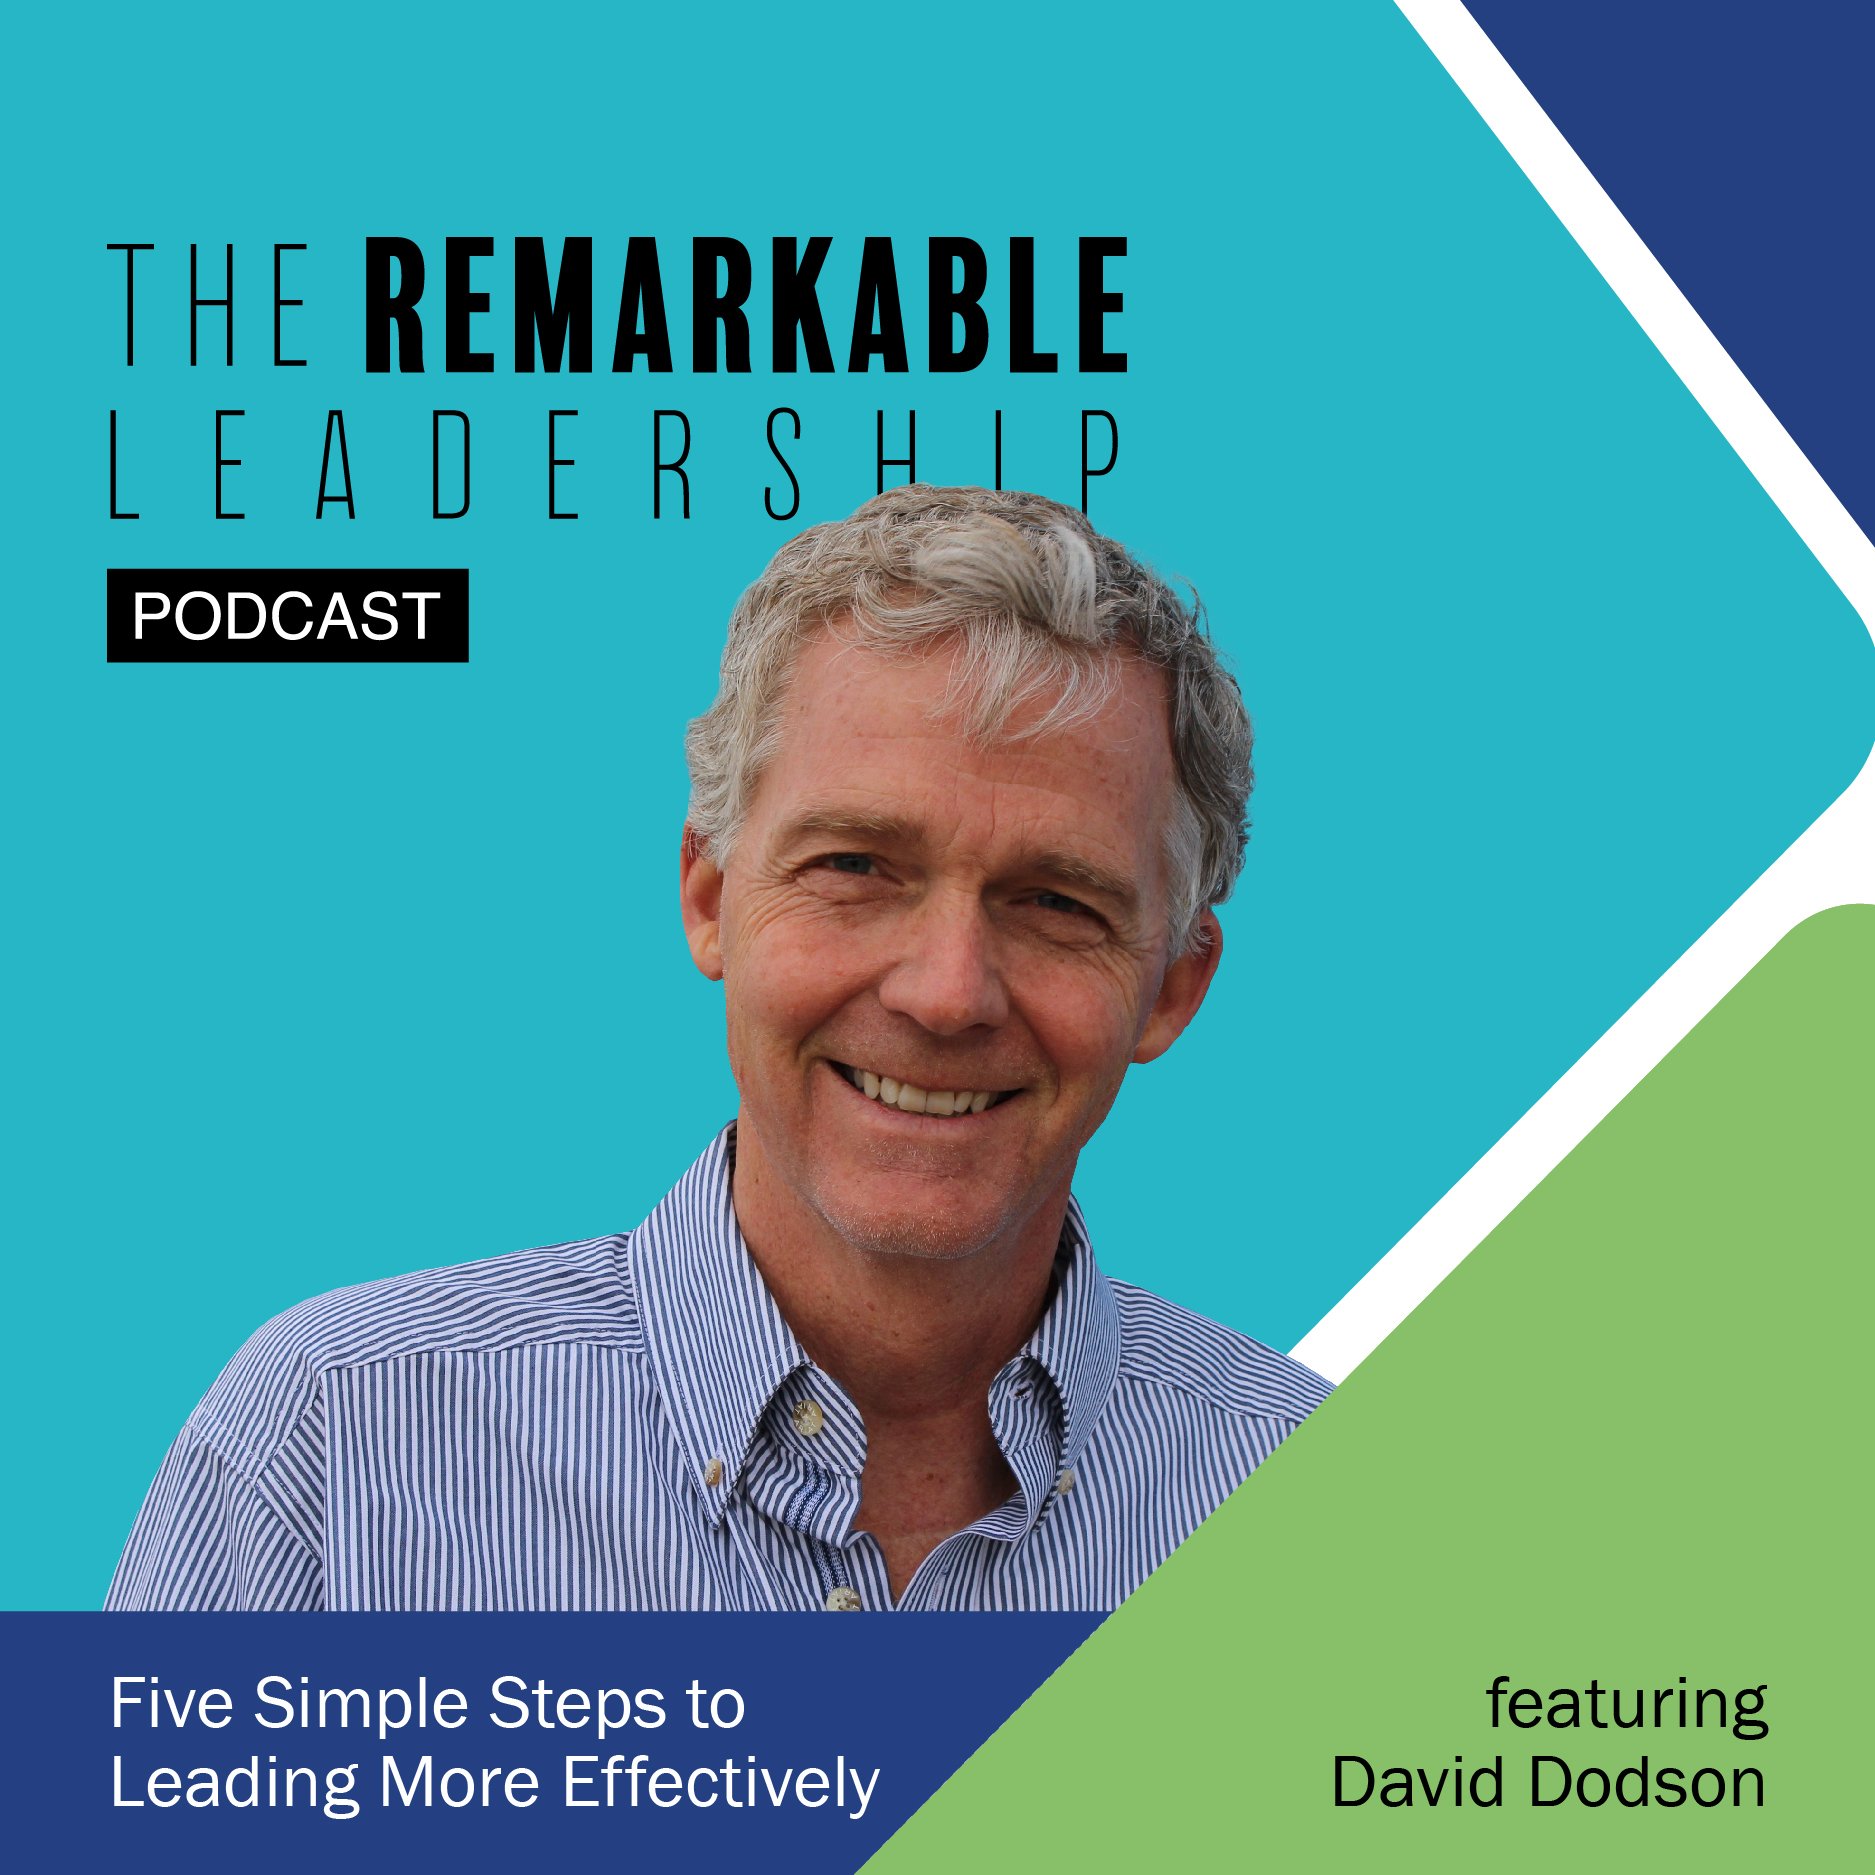 Five Simple Steps to Leading More Effectively with David Dodson